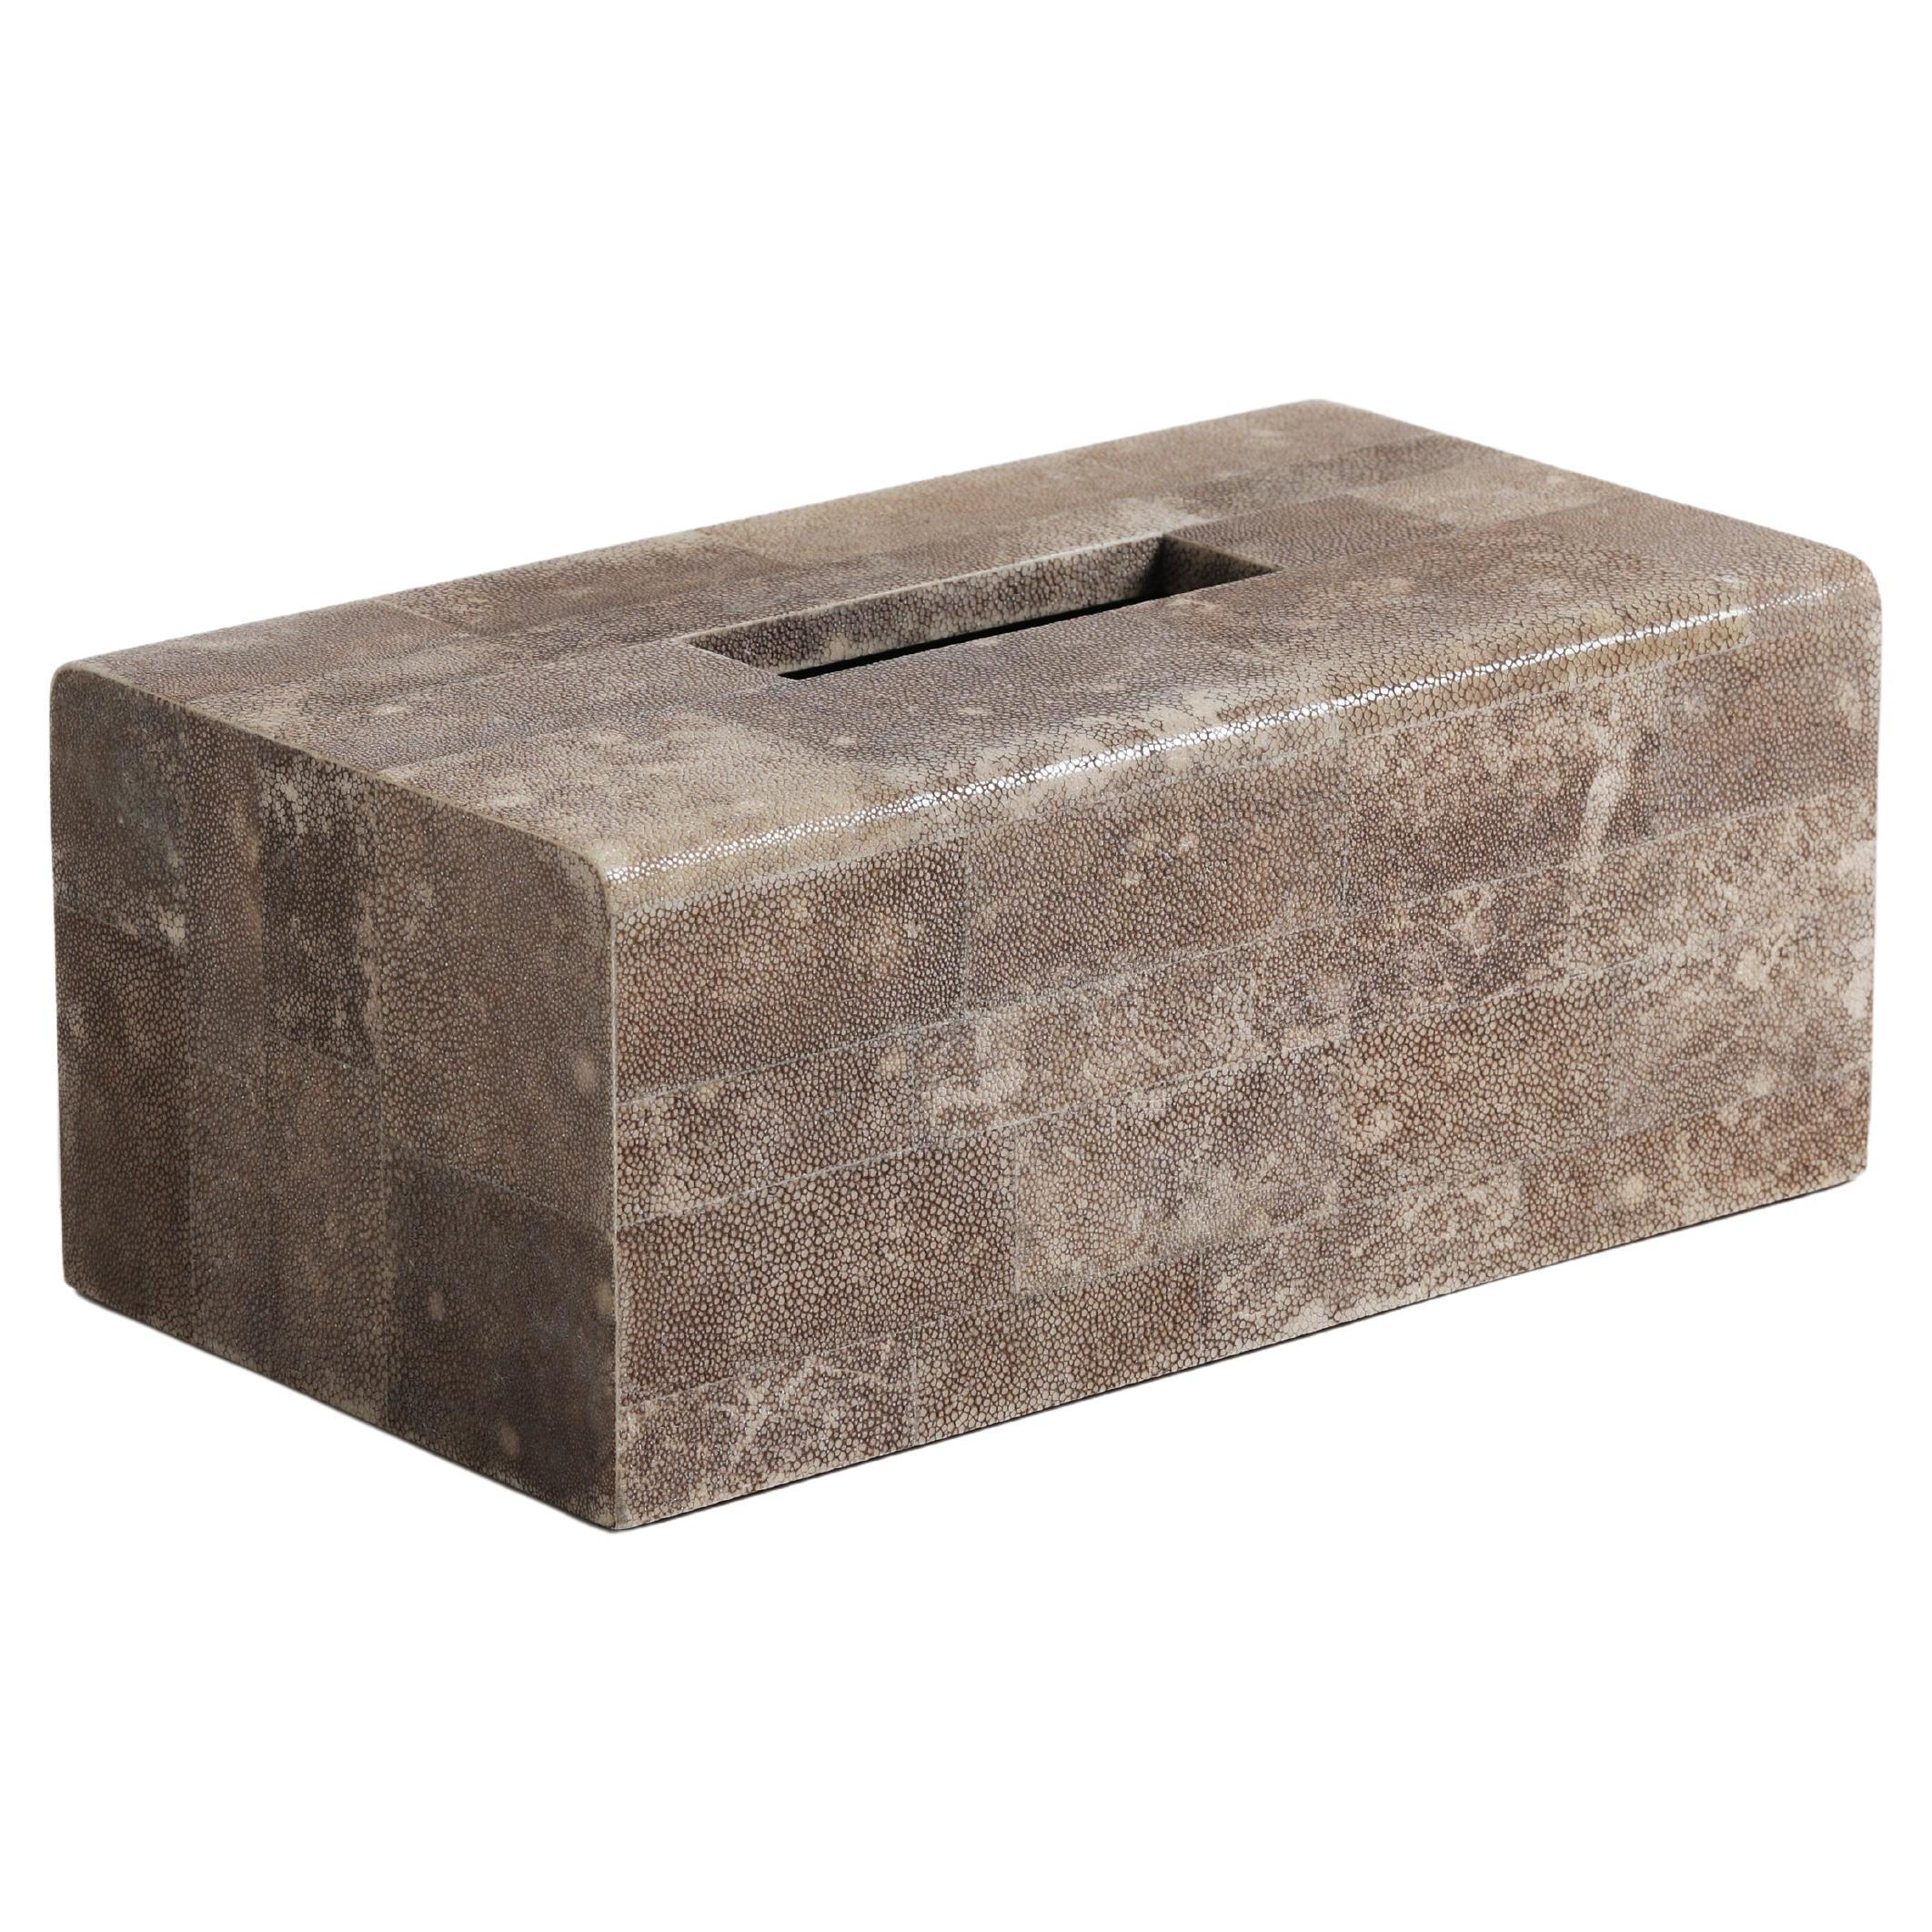 Limited Edition Natural Distressed Shagreen Long Tissue Box by Alexander Lamont